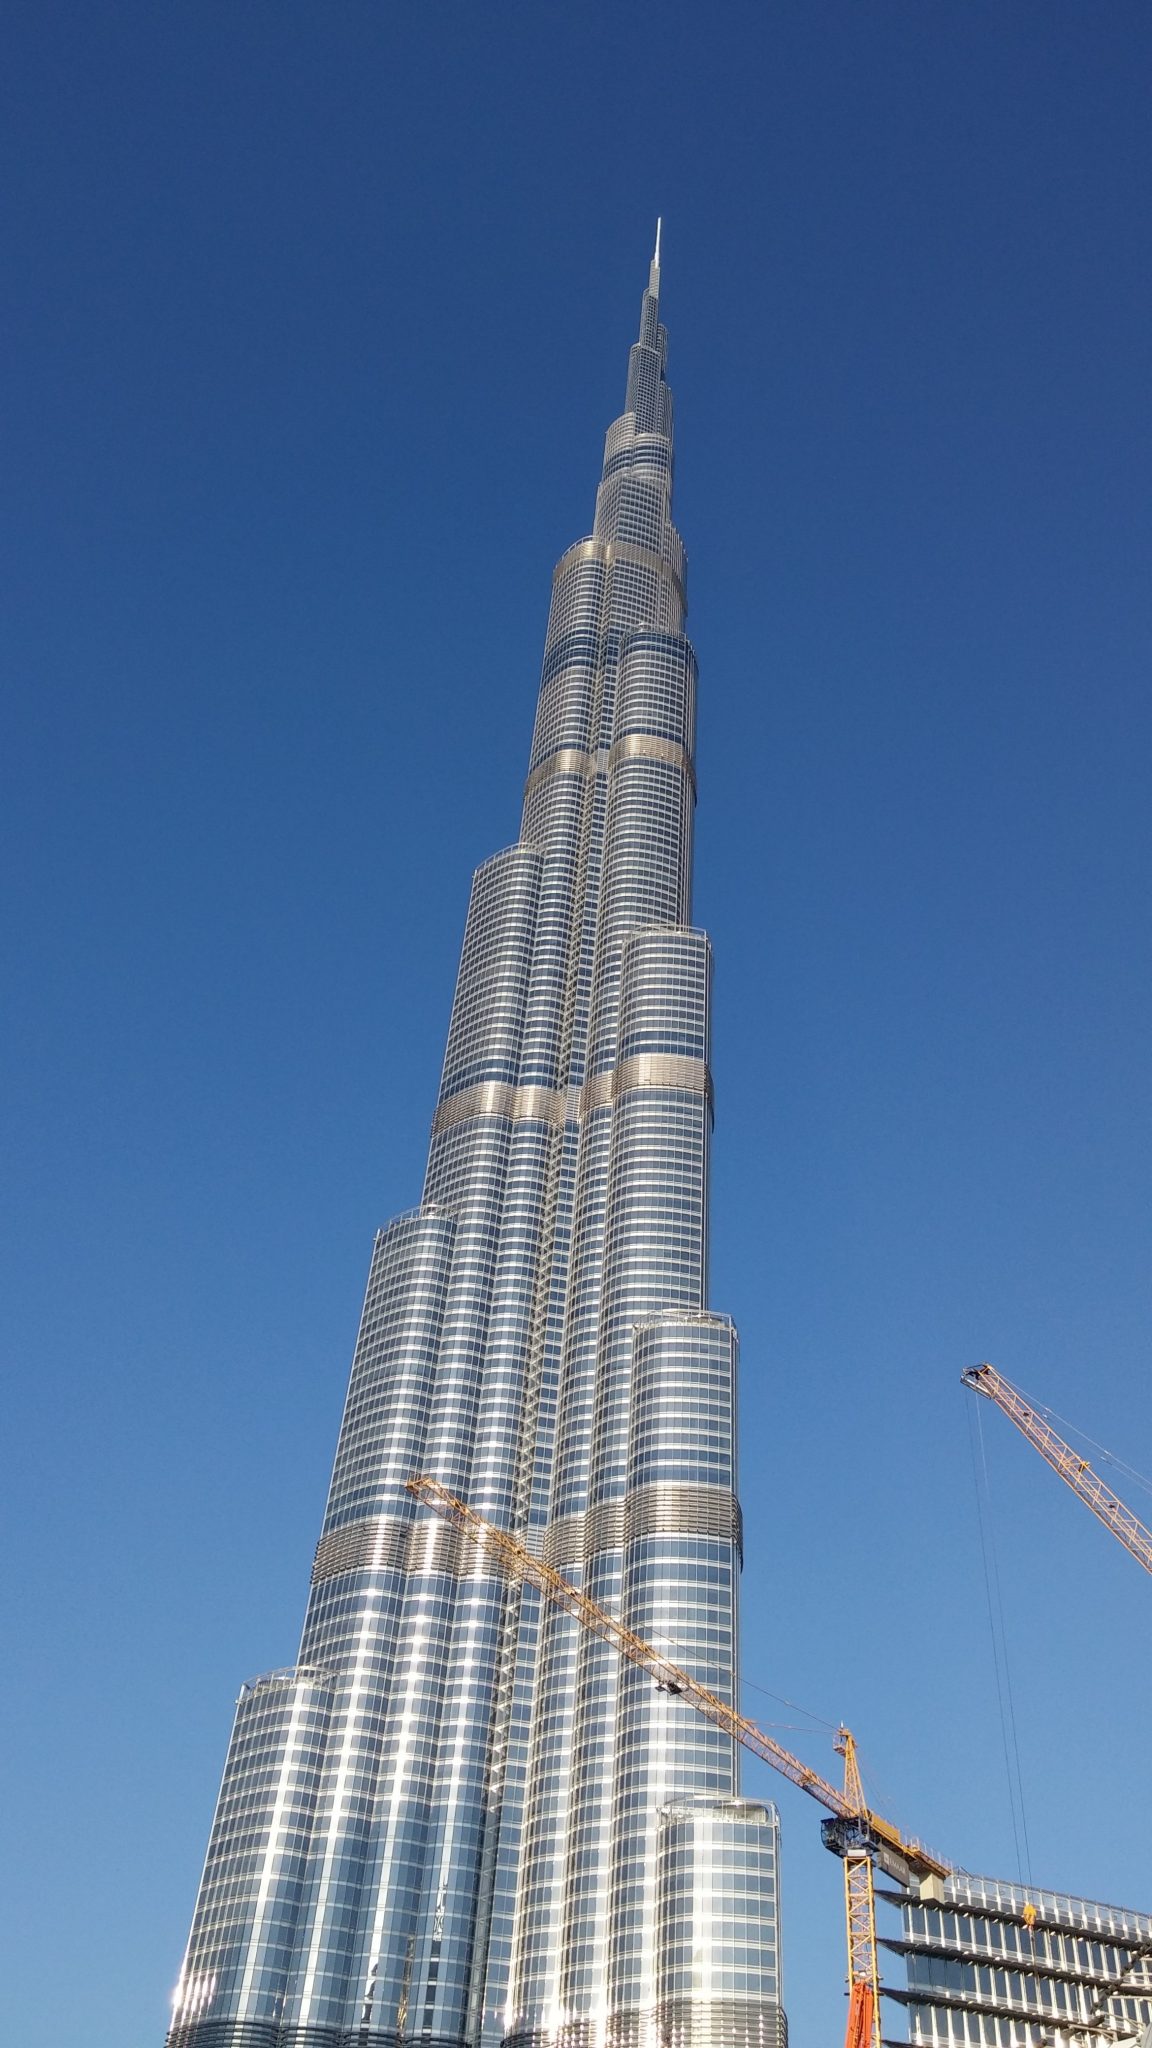 The top of the Burj Khalifa. It is pretty much impossible to fit it all in one shot!